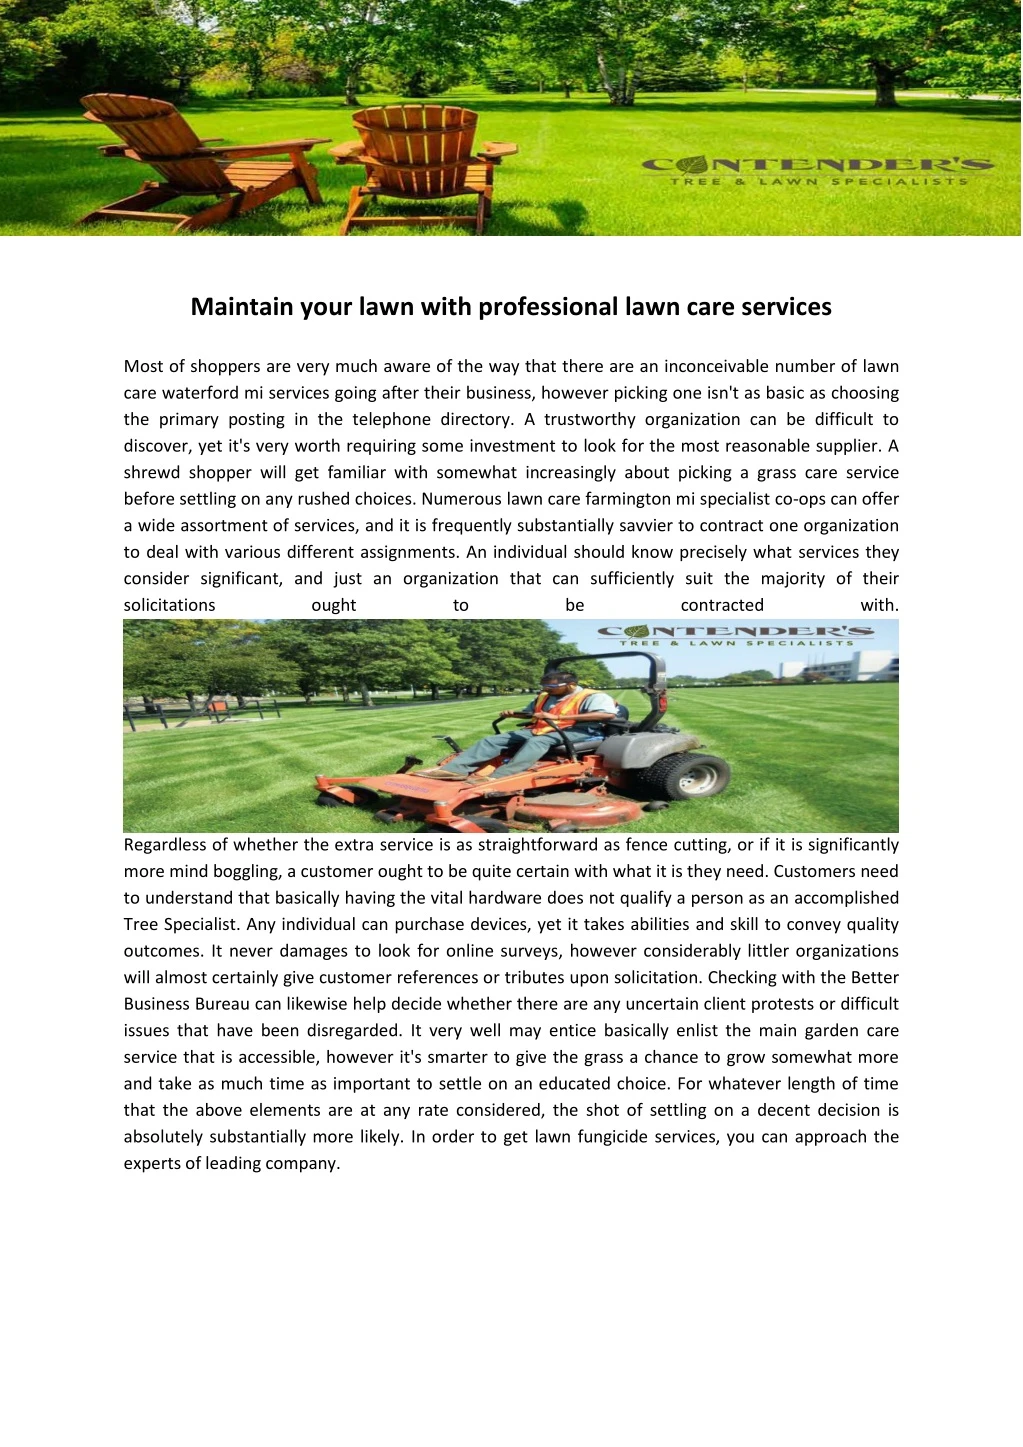 maintain your lawn with professional lawn care